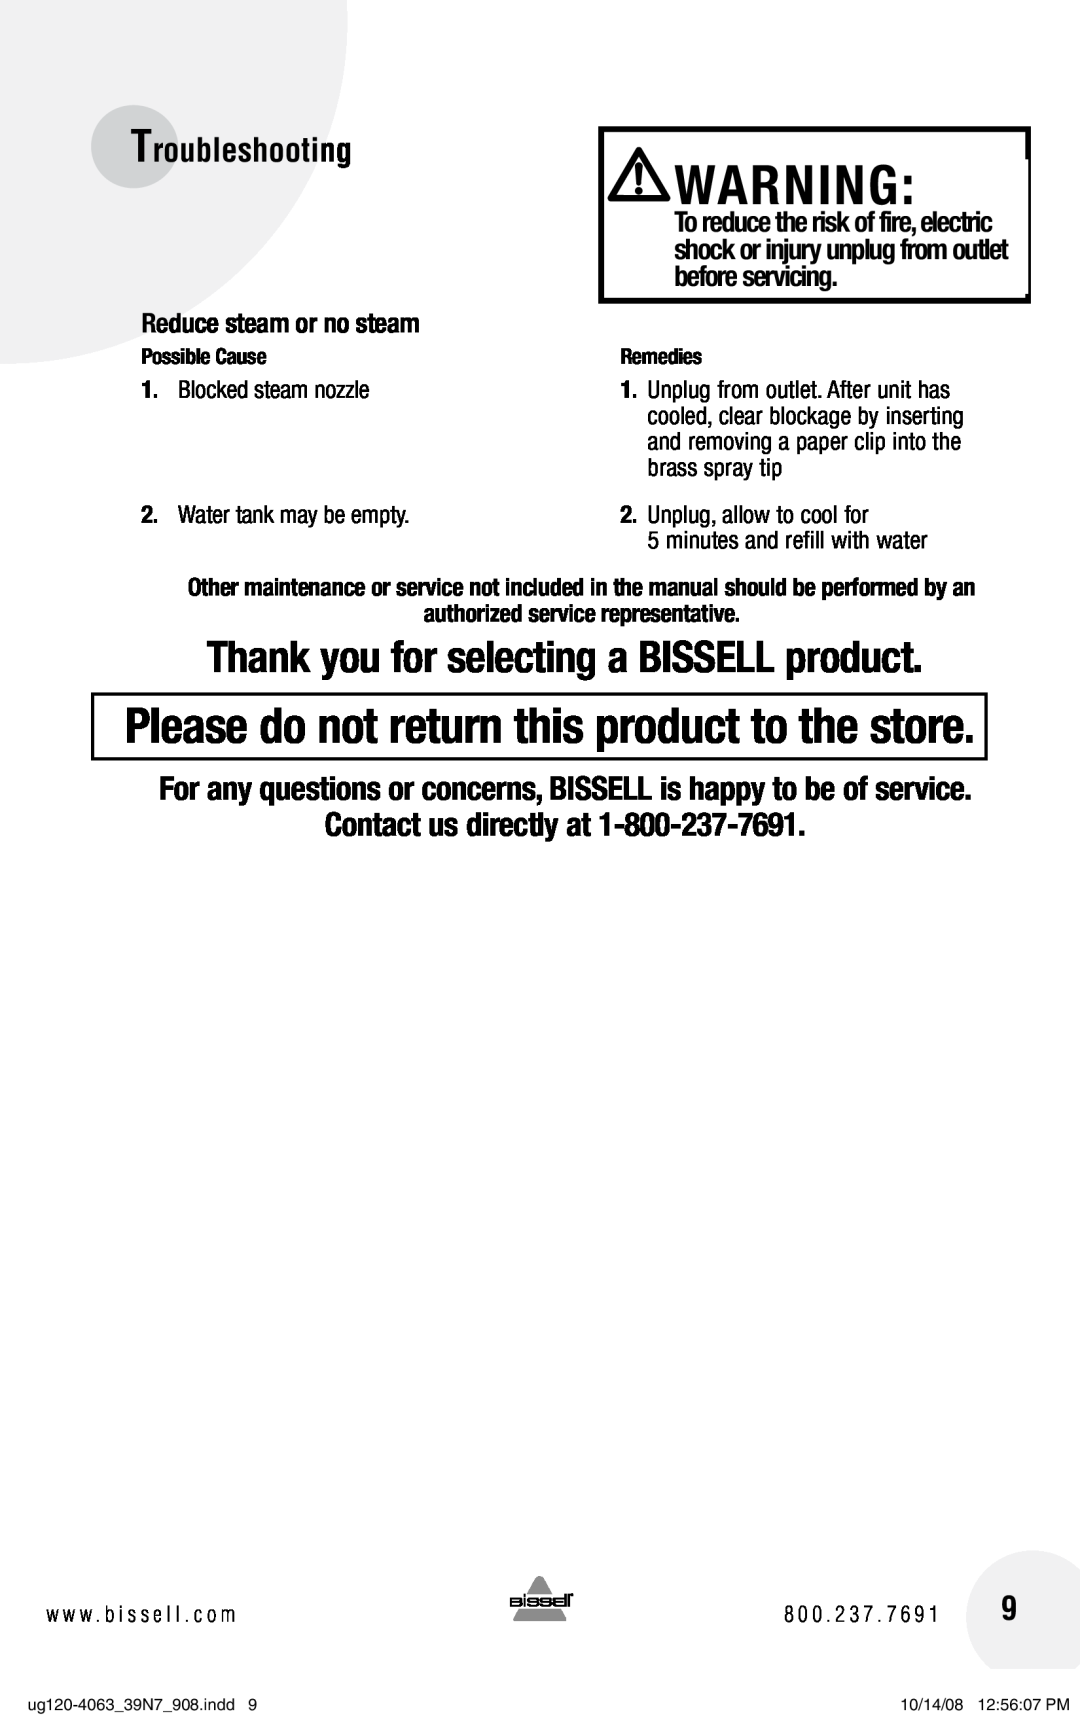 Bissell 39N7 Troubleshooting, Contact us directly at, Reduce steam or no steam, Thank you for selecting a BISSELL product 